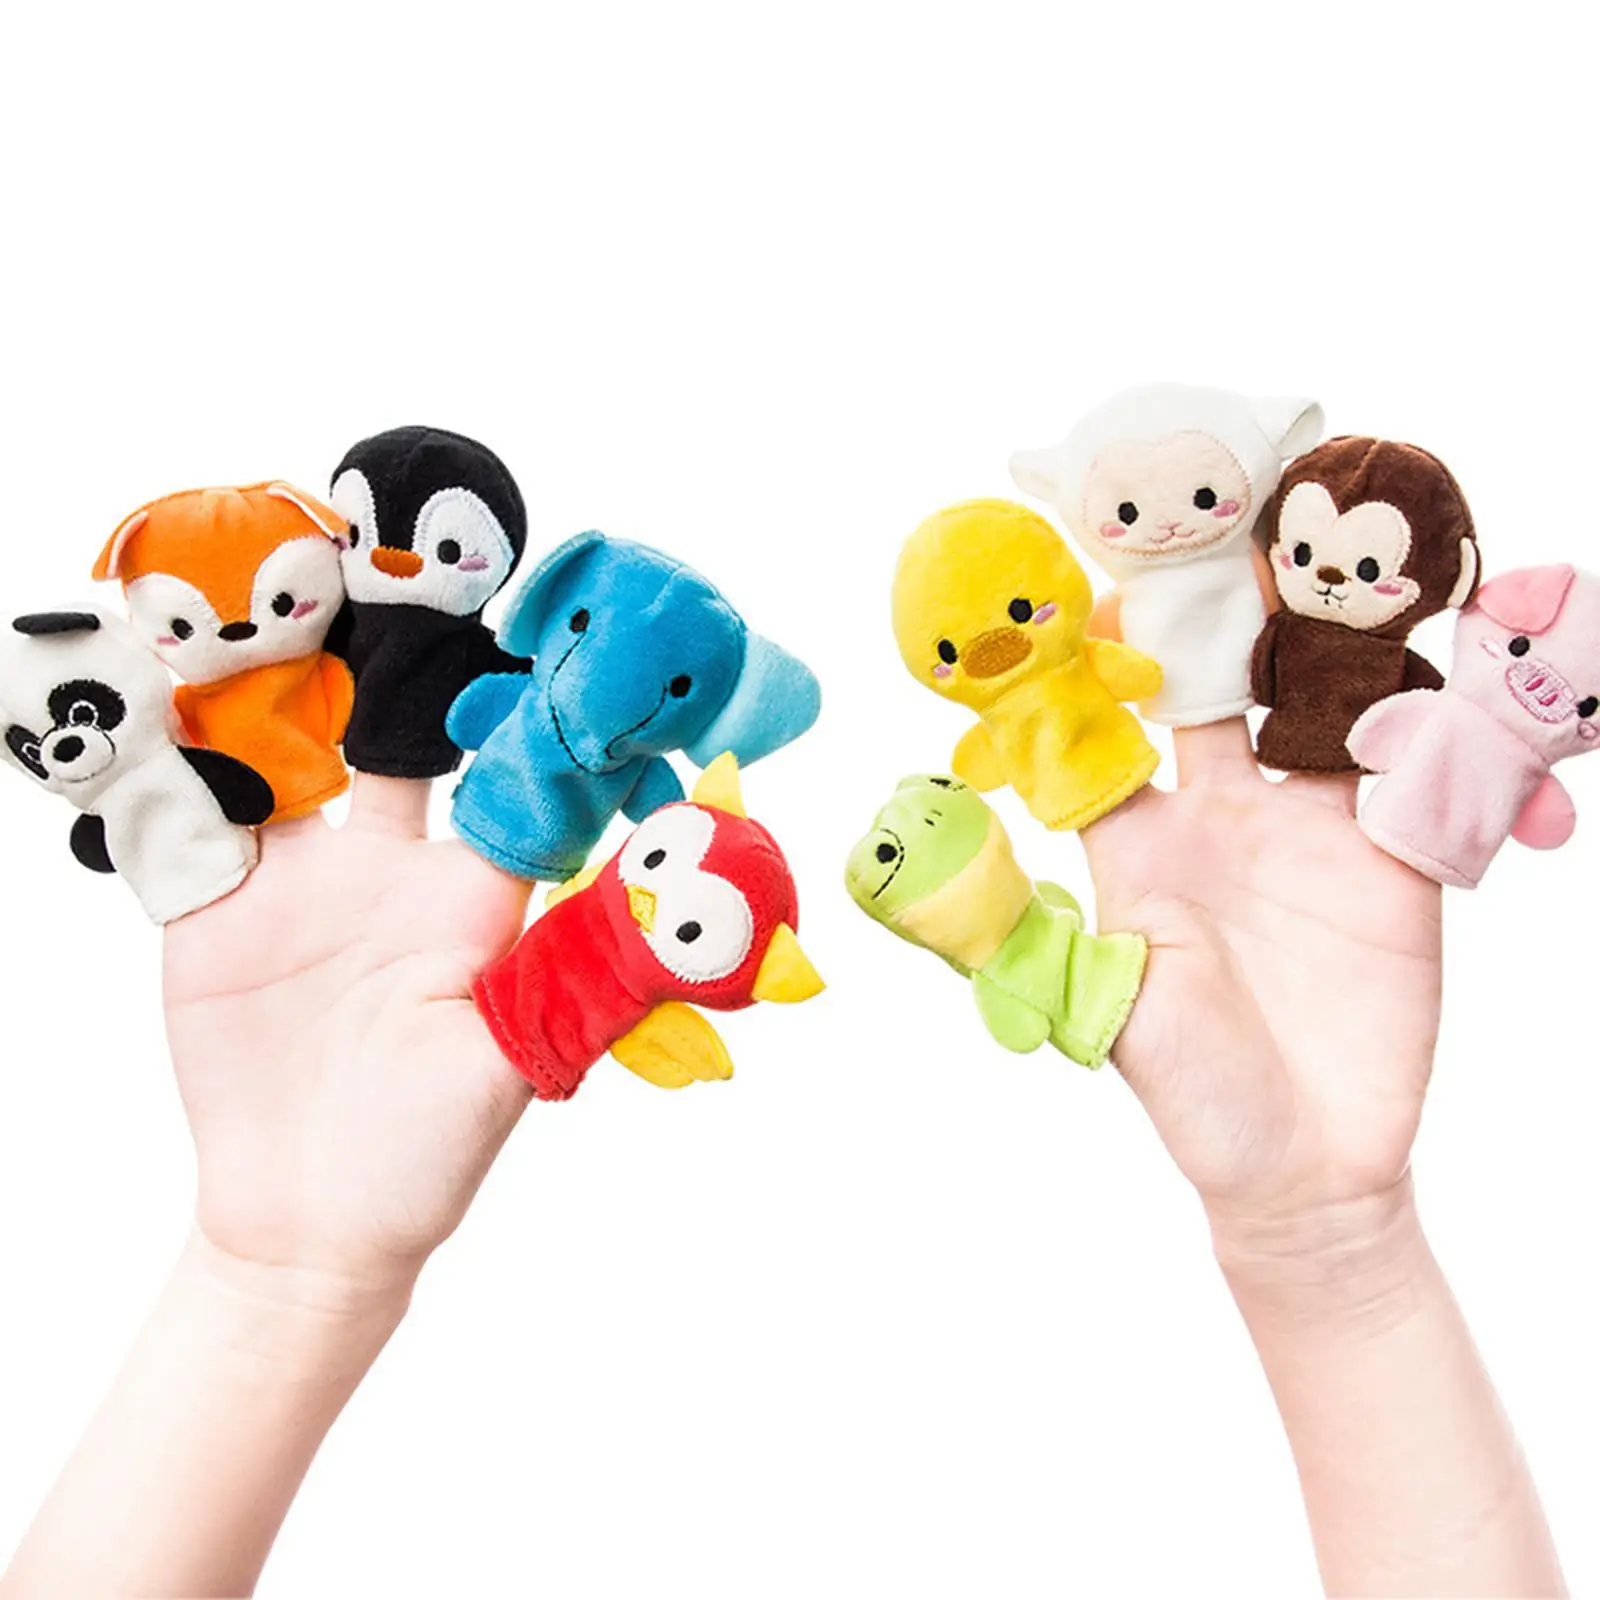 10 Pieces Novelty Family Finger Puppets Cloth Doll Role Play Baby Story Time